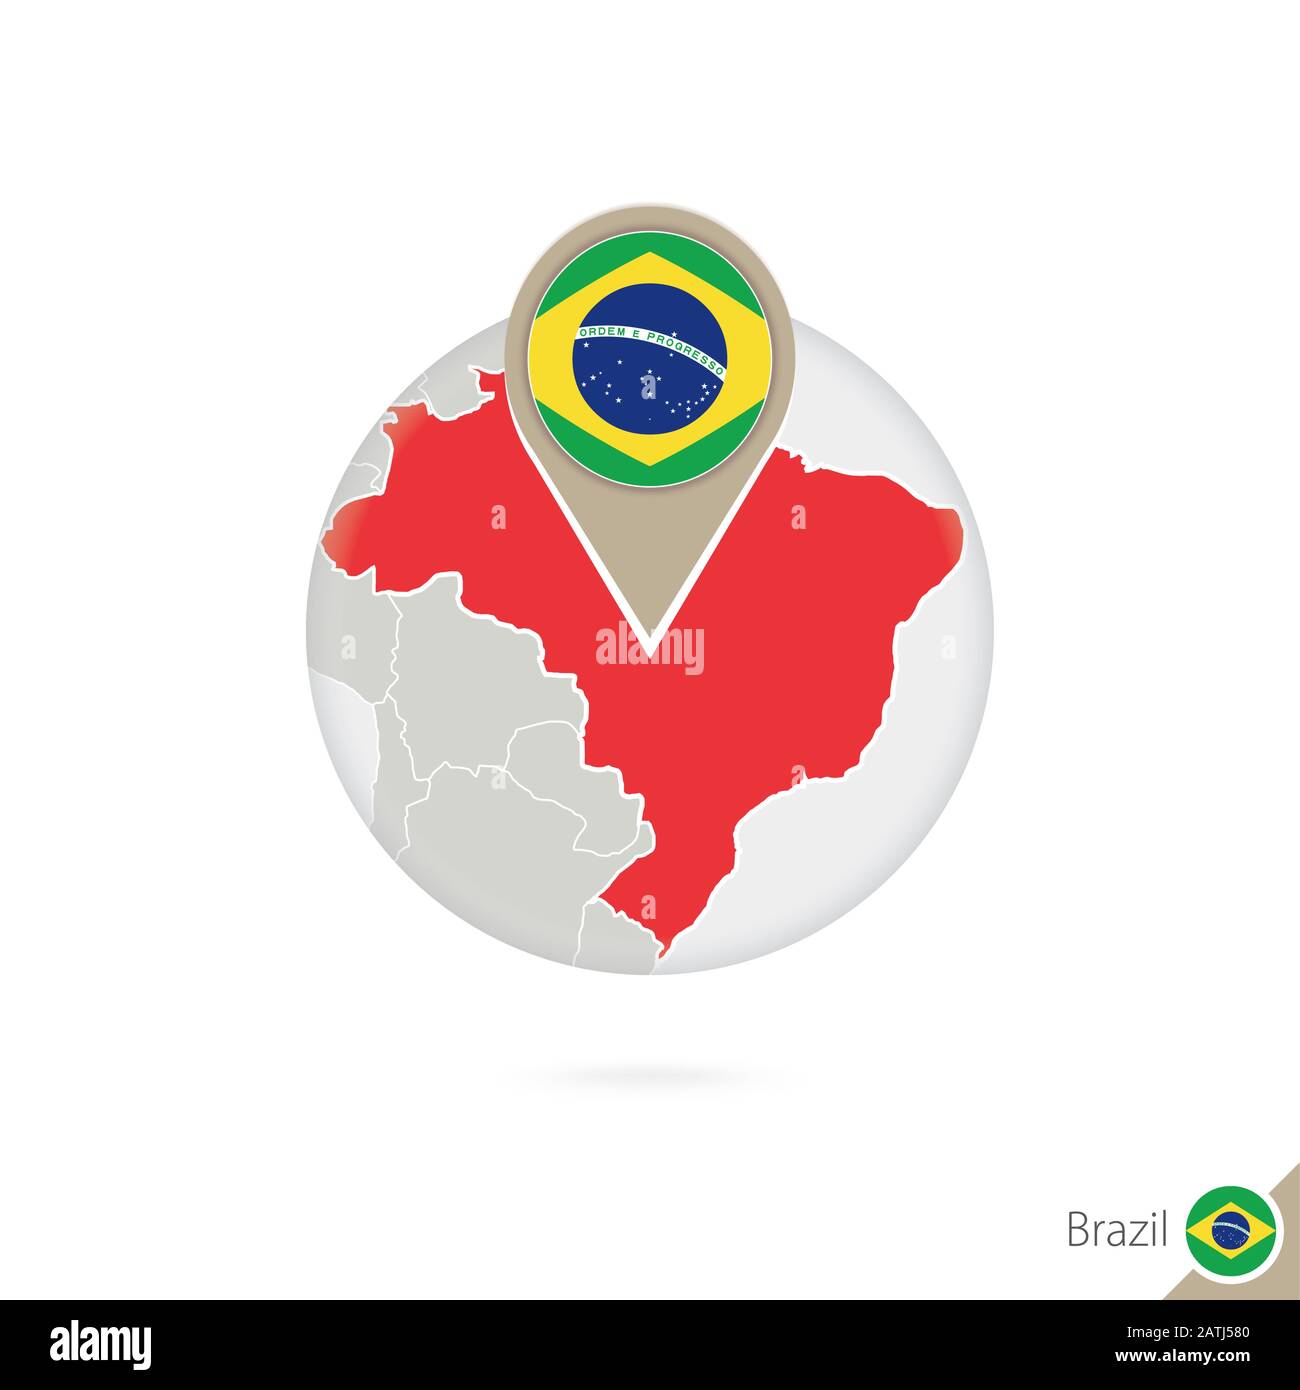 Brazil map and flag in circle. Map of Brazil, Brazil flag pin. Map of Brazil in the style of the globe. Vector Illustration. Stock Vector